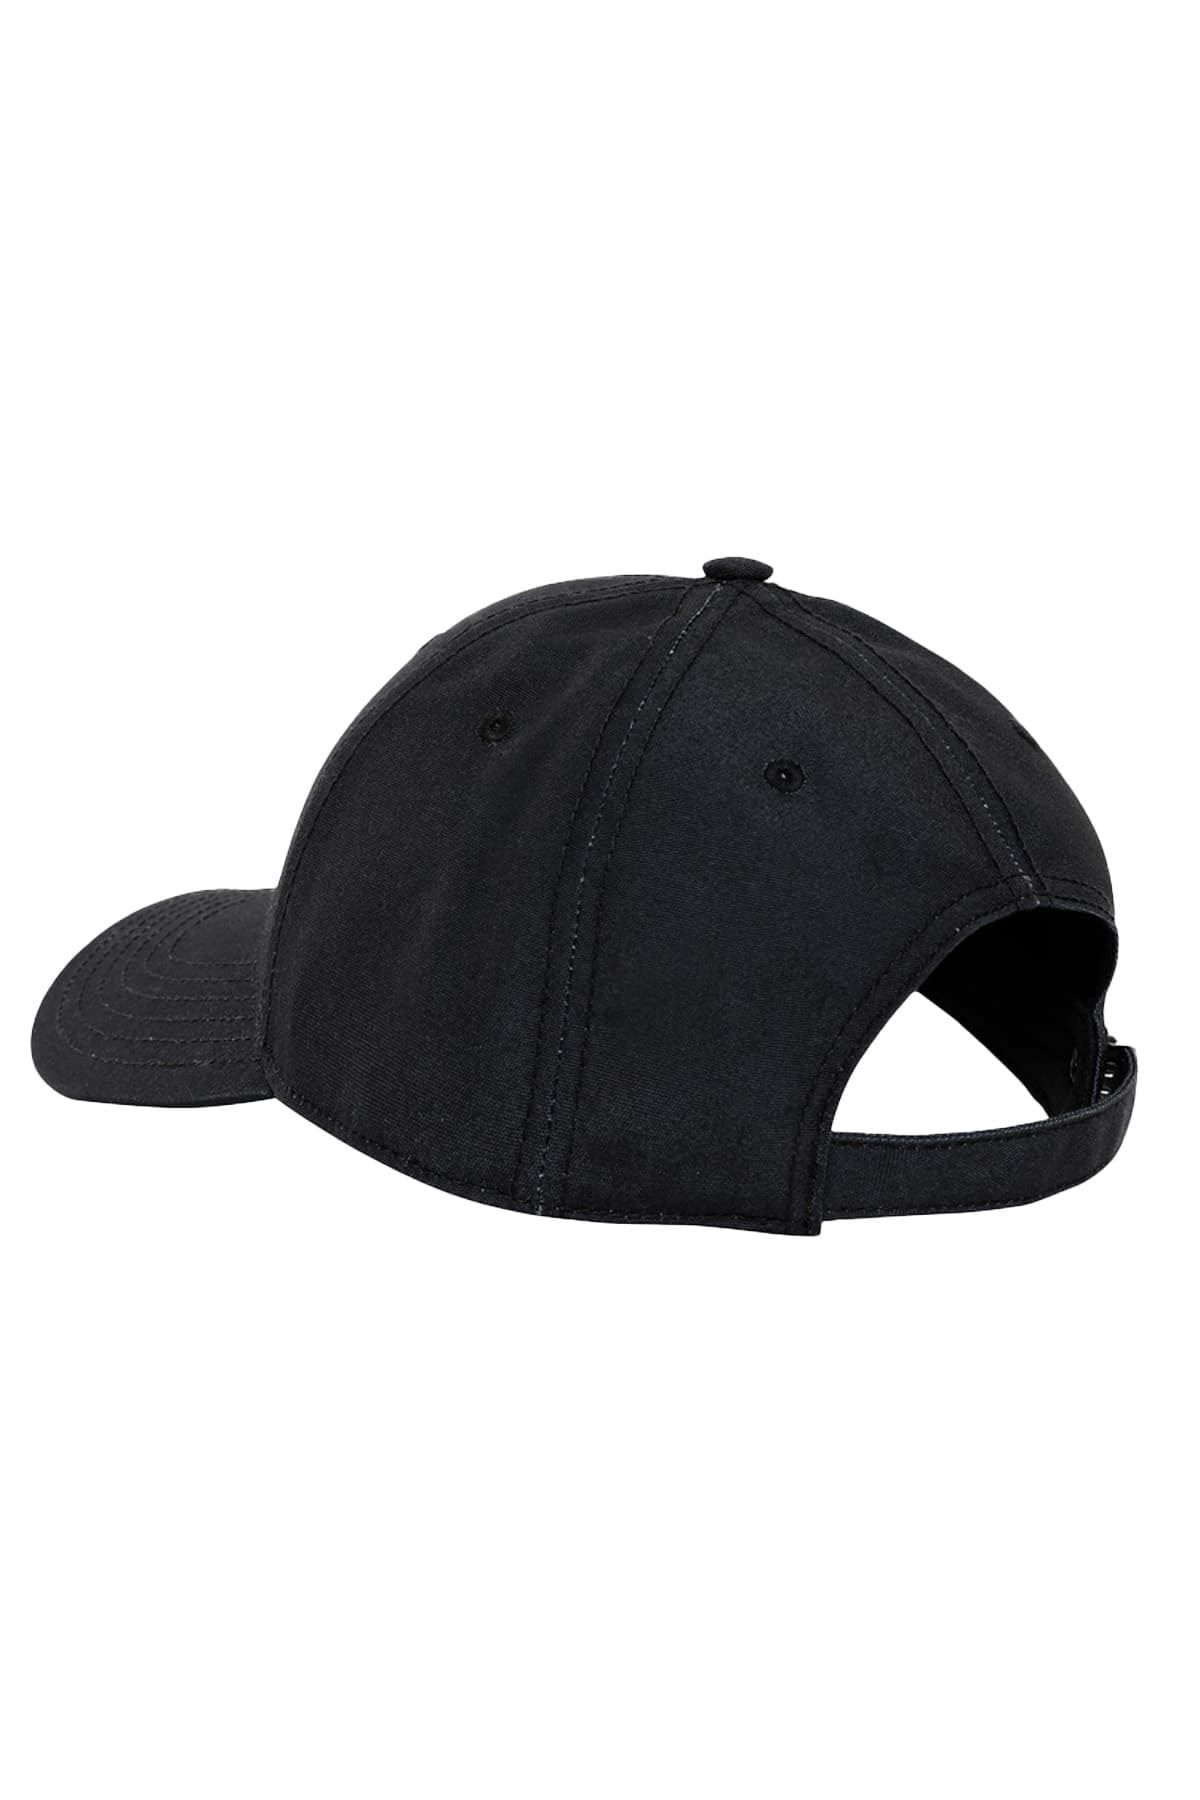 The North Face بازیافت 66 خط کلاسیک Unisex Hat NF0A4VSVV